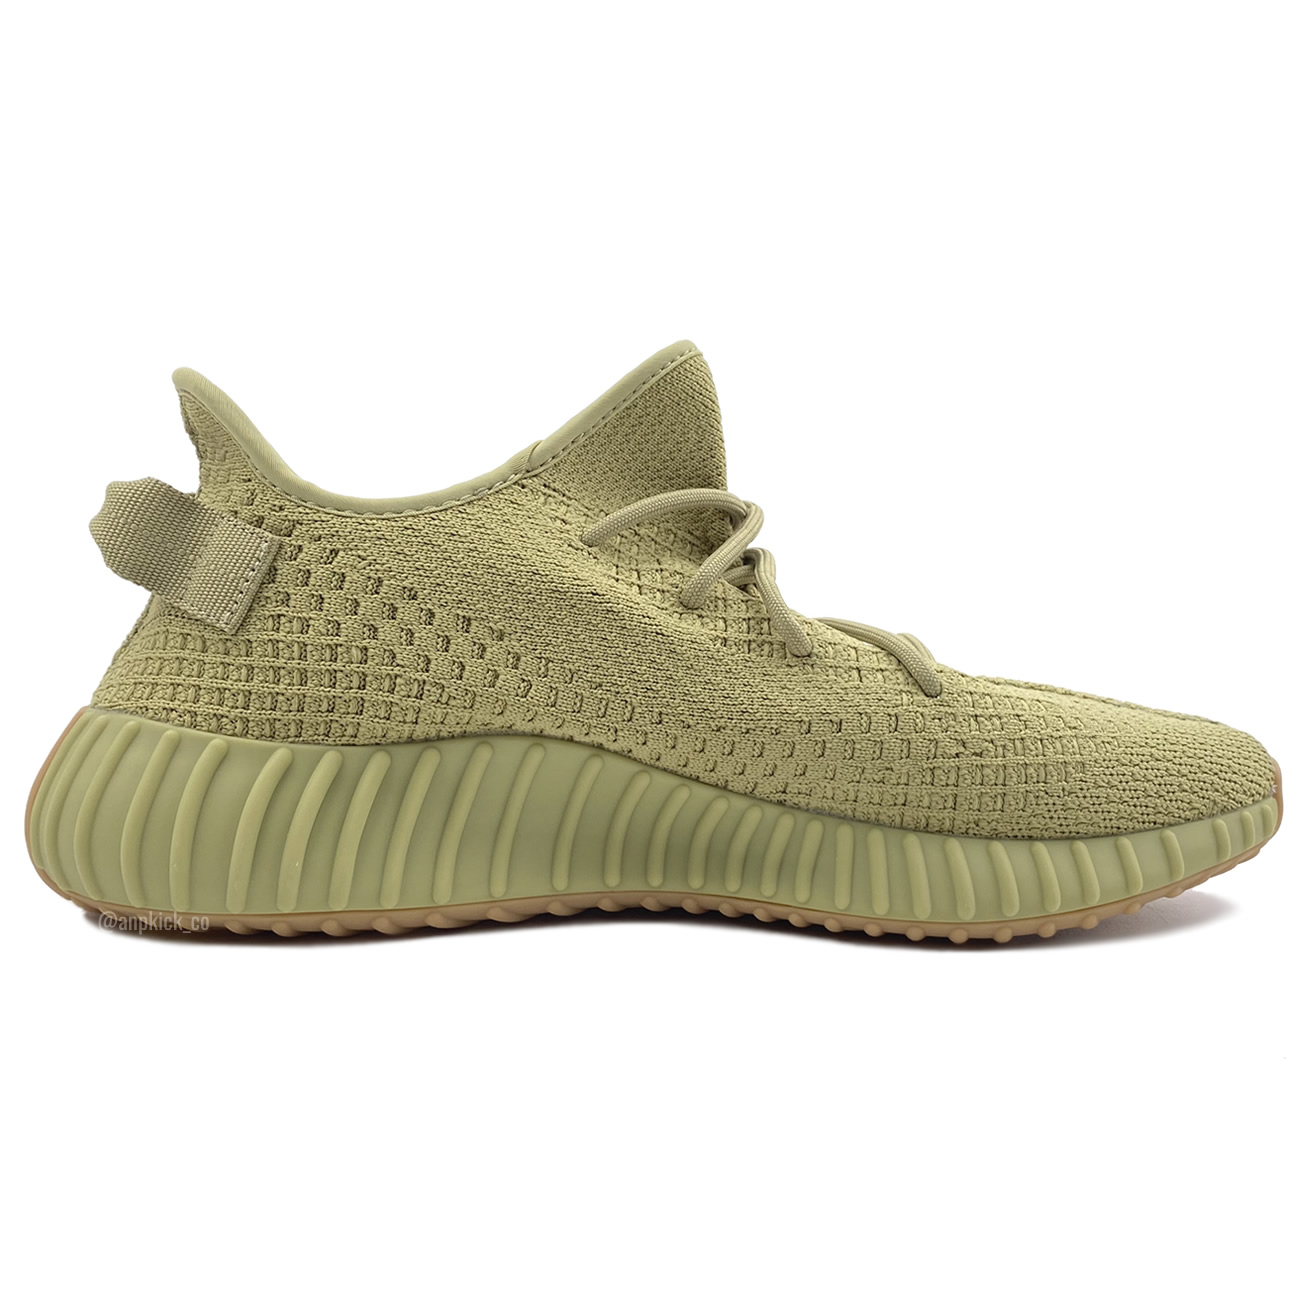 Adidas Yeezy Boost 350 V2 Sulfur Fy5346 First Preview Release Date (2) - newkick.org